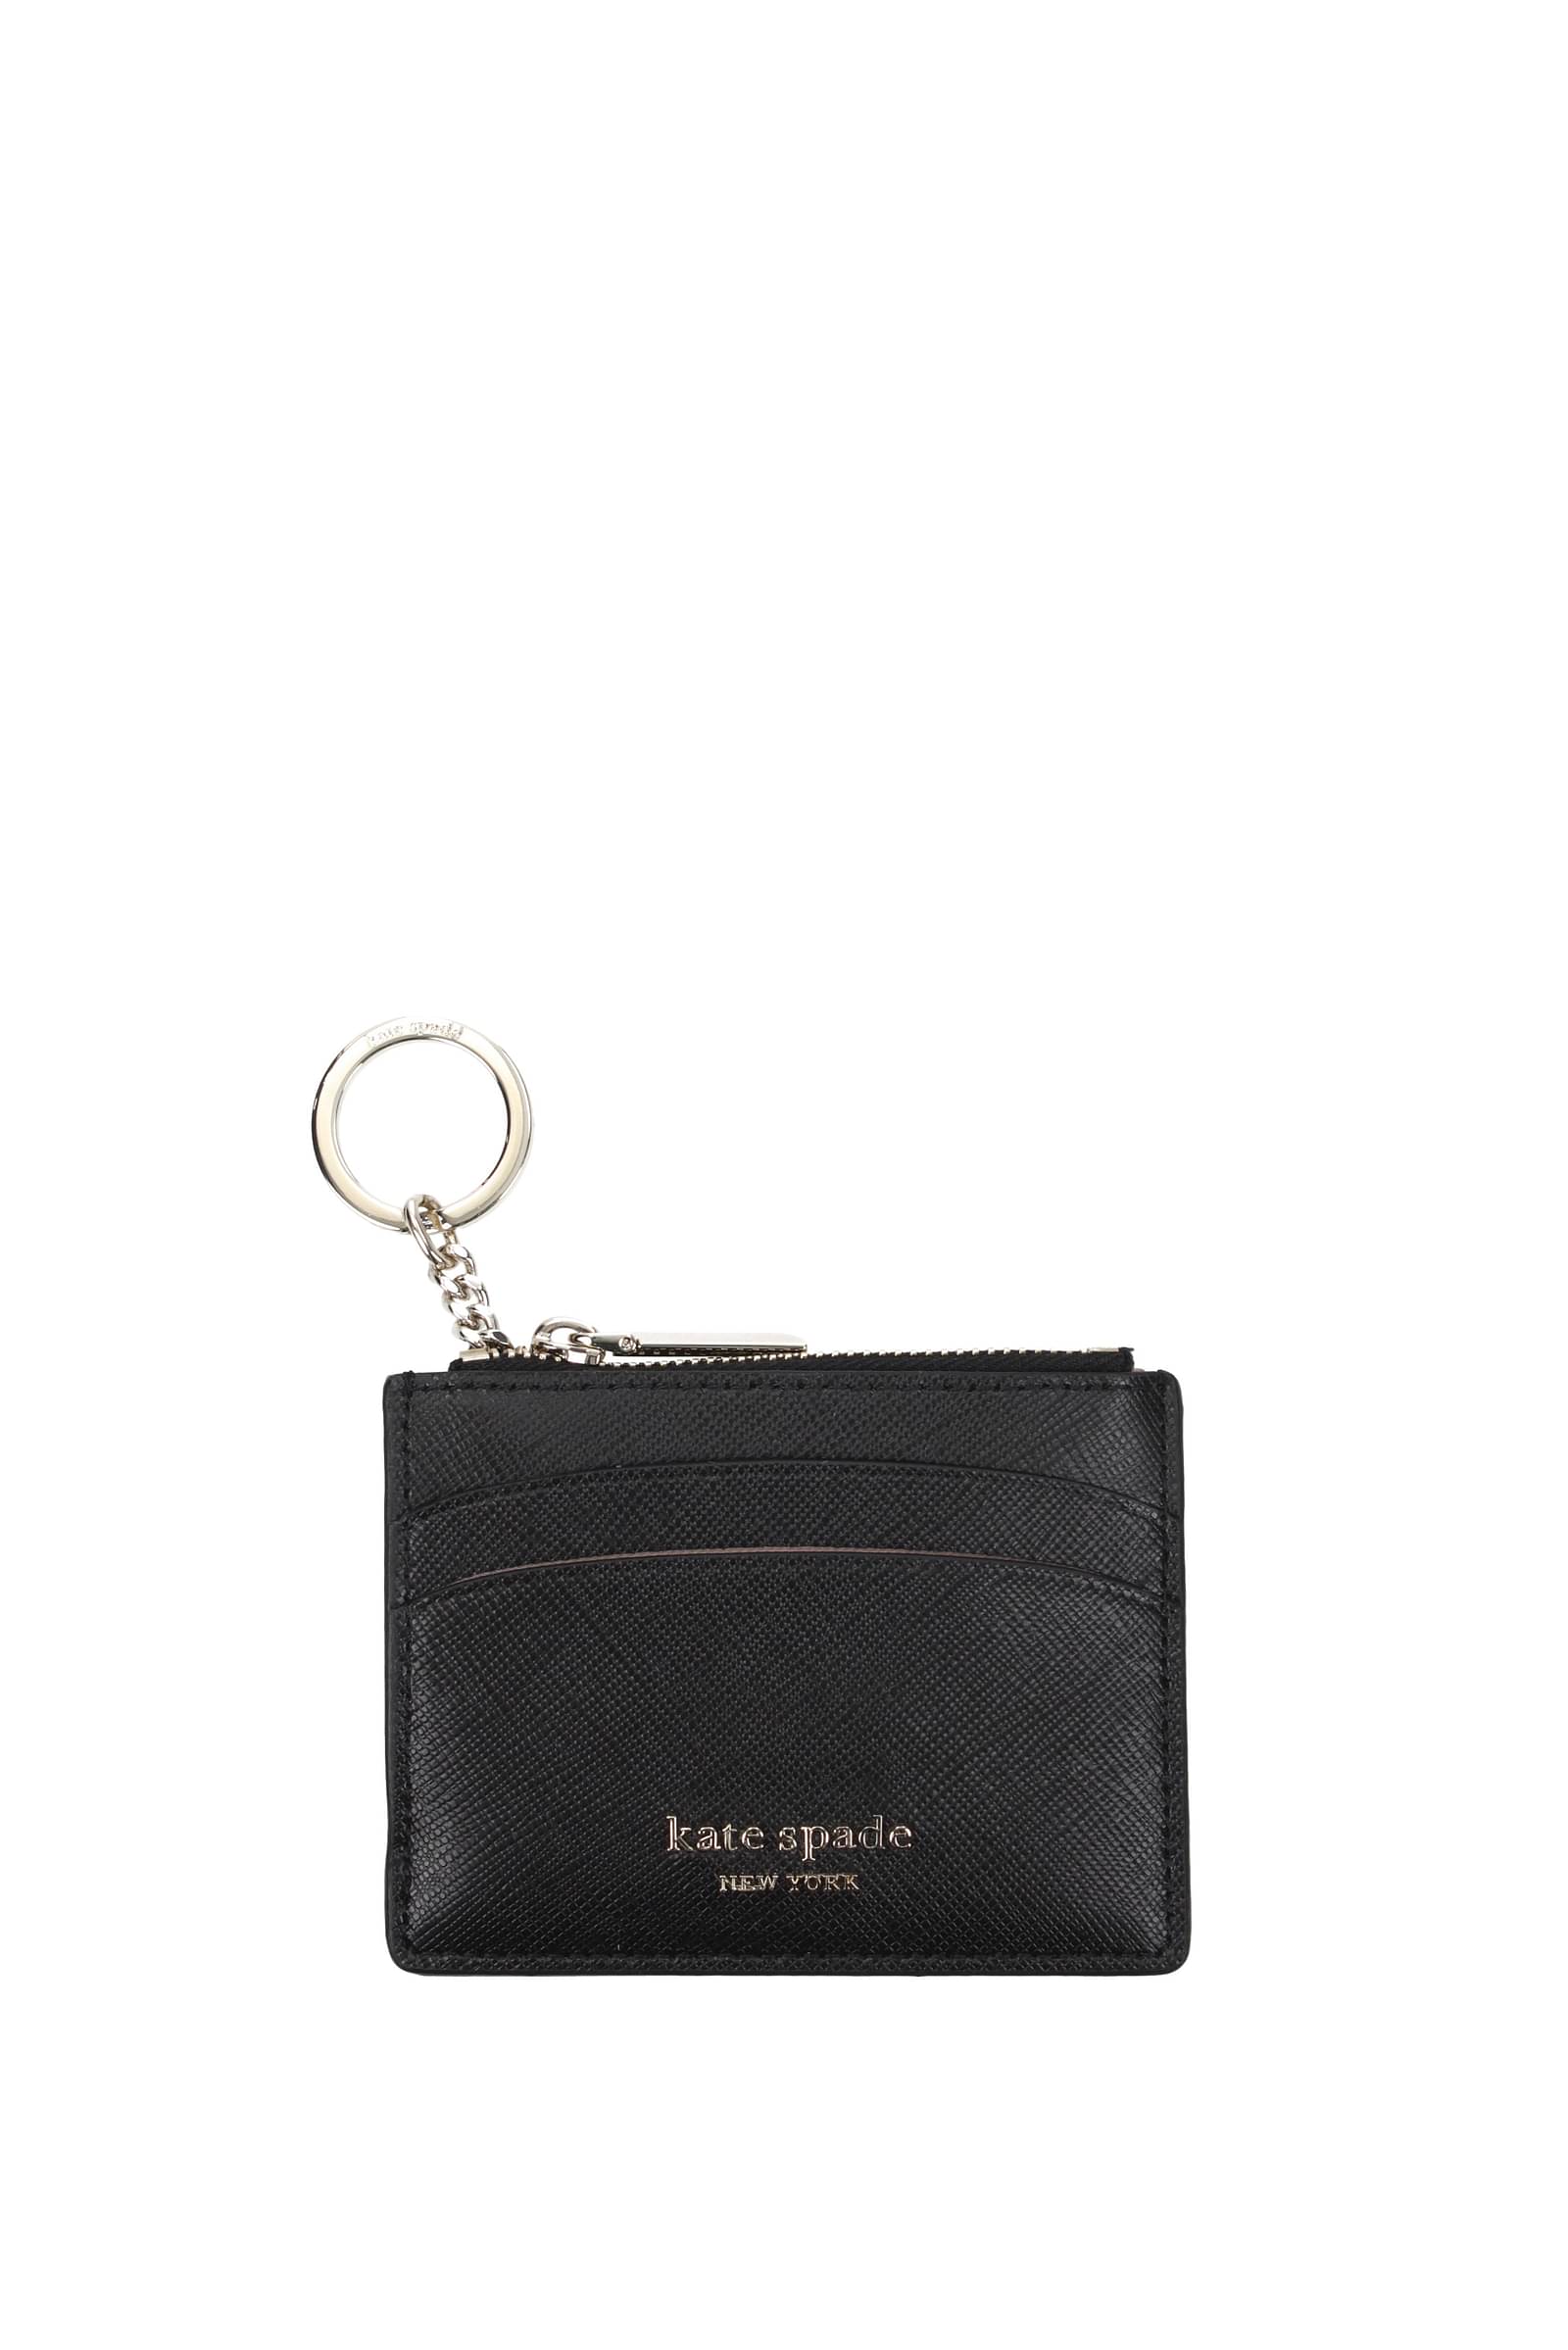 Online Outlet Center - 3,950฿🇺🇸Pre-Order Kate Spade Carson Convertible  Colorblock Convertible Crossbody WKR00119 100% Authentic,Money back  Guaranteed 6.87